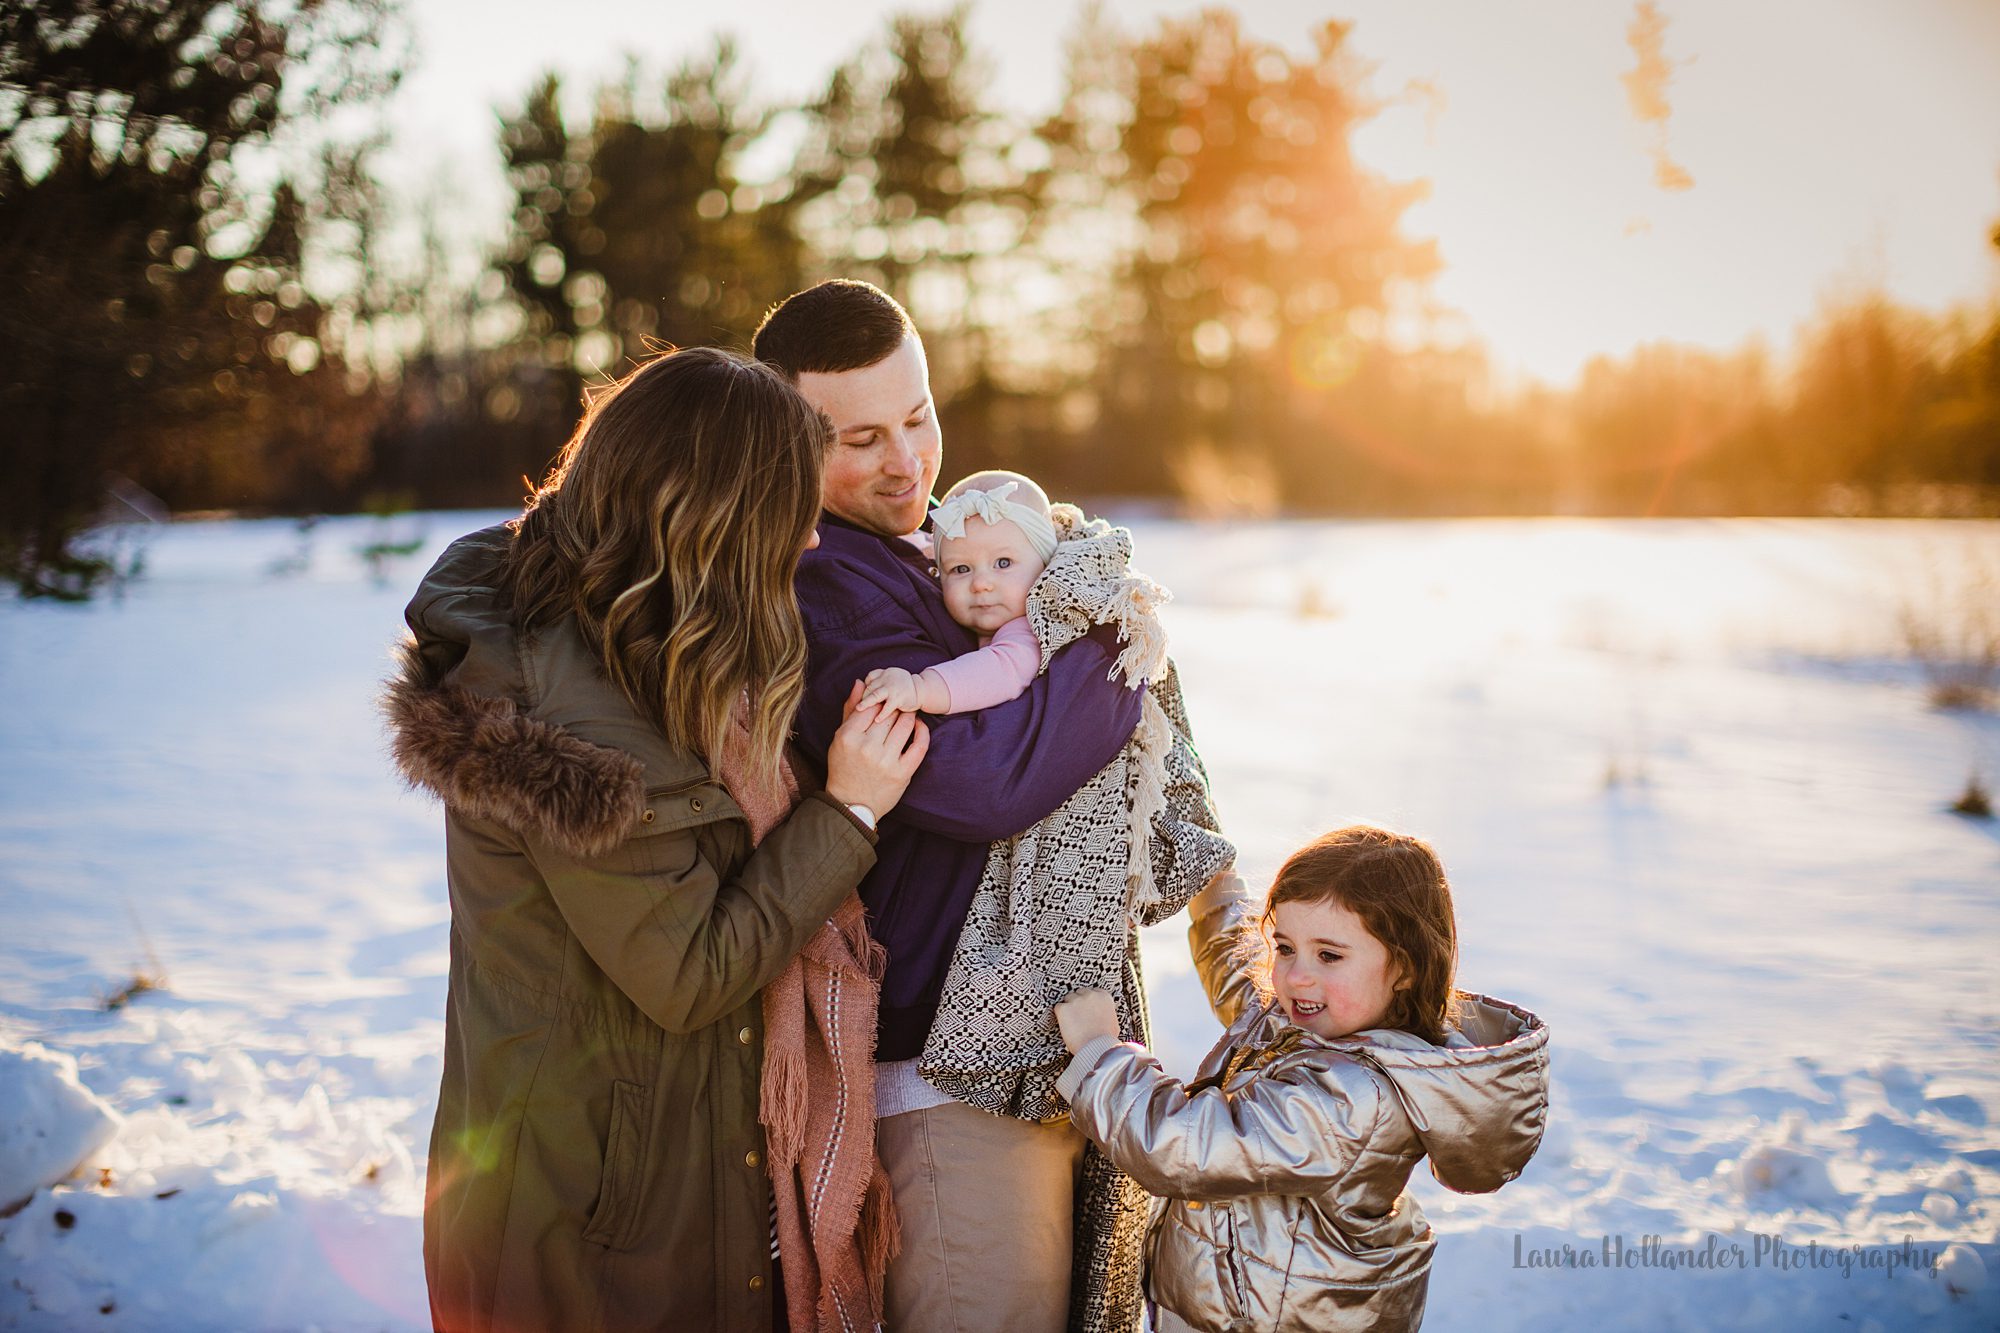 winter family portraits in southwest Michigan with Laura Hollander Photography